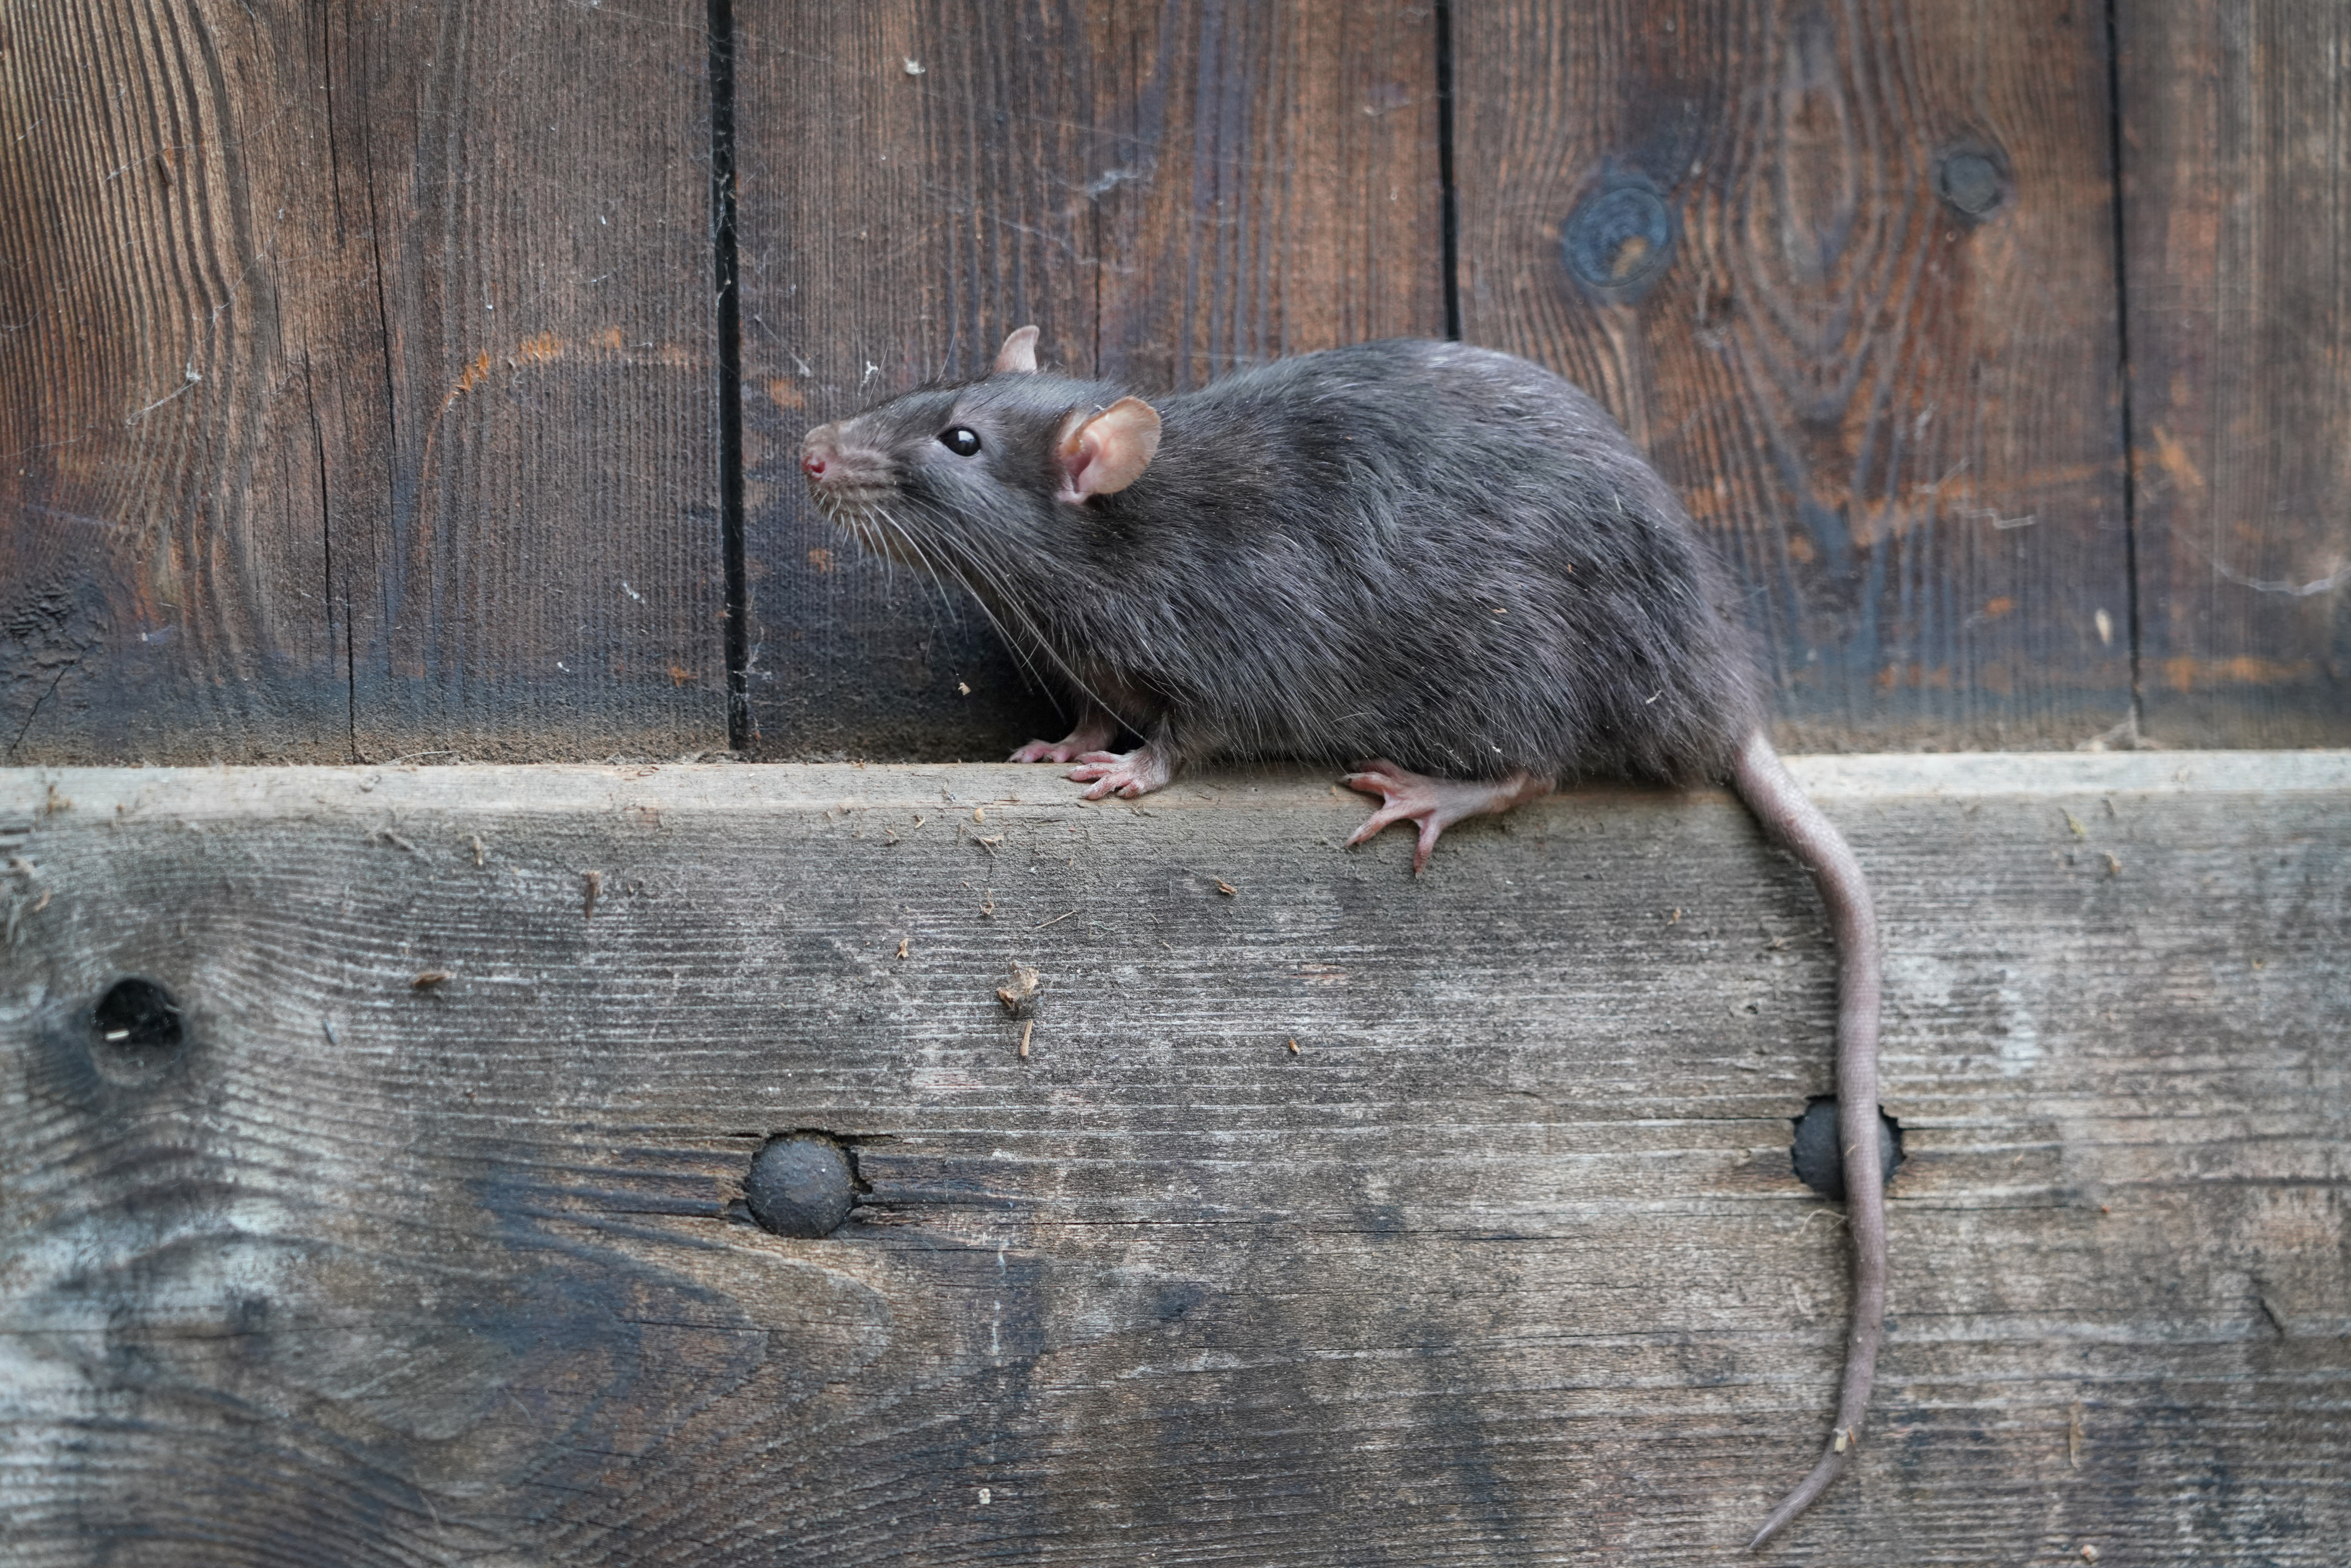 Find a solution to your rat control problem.